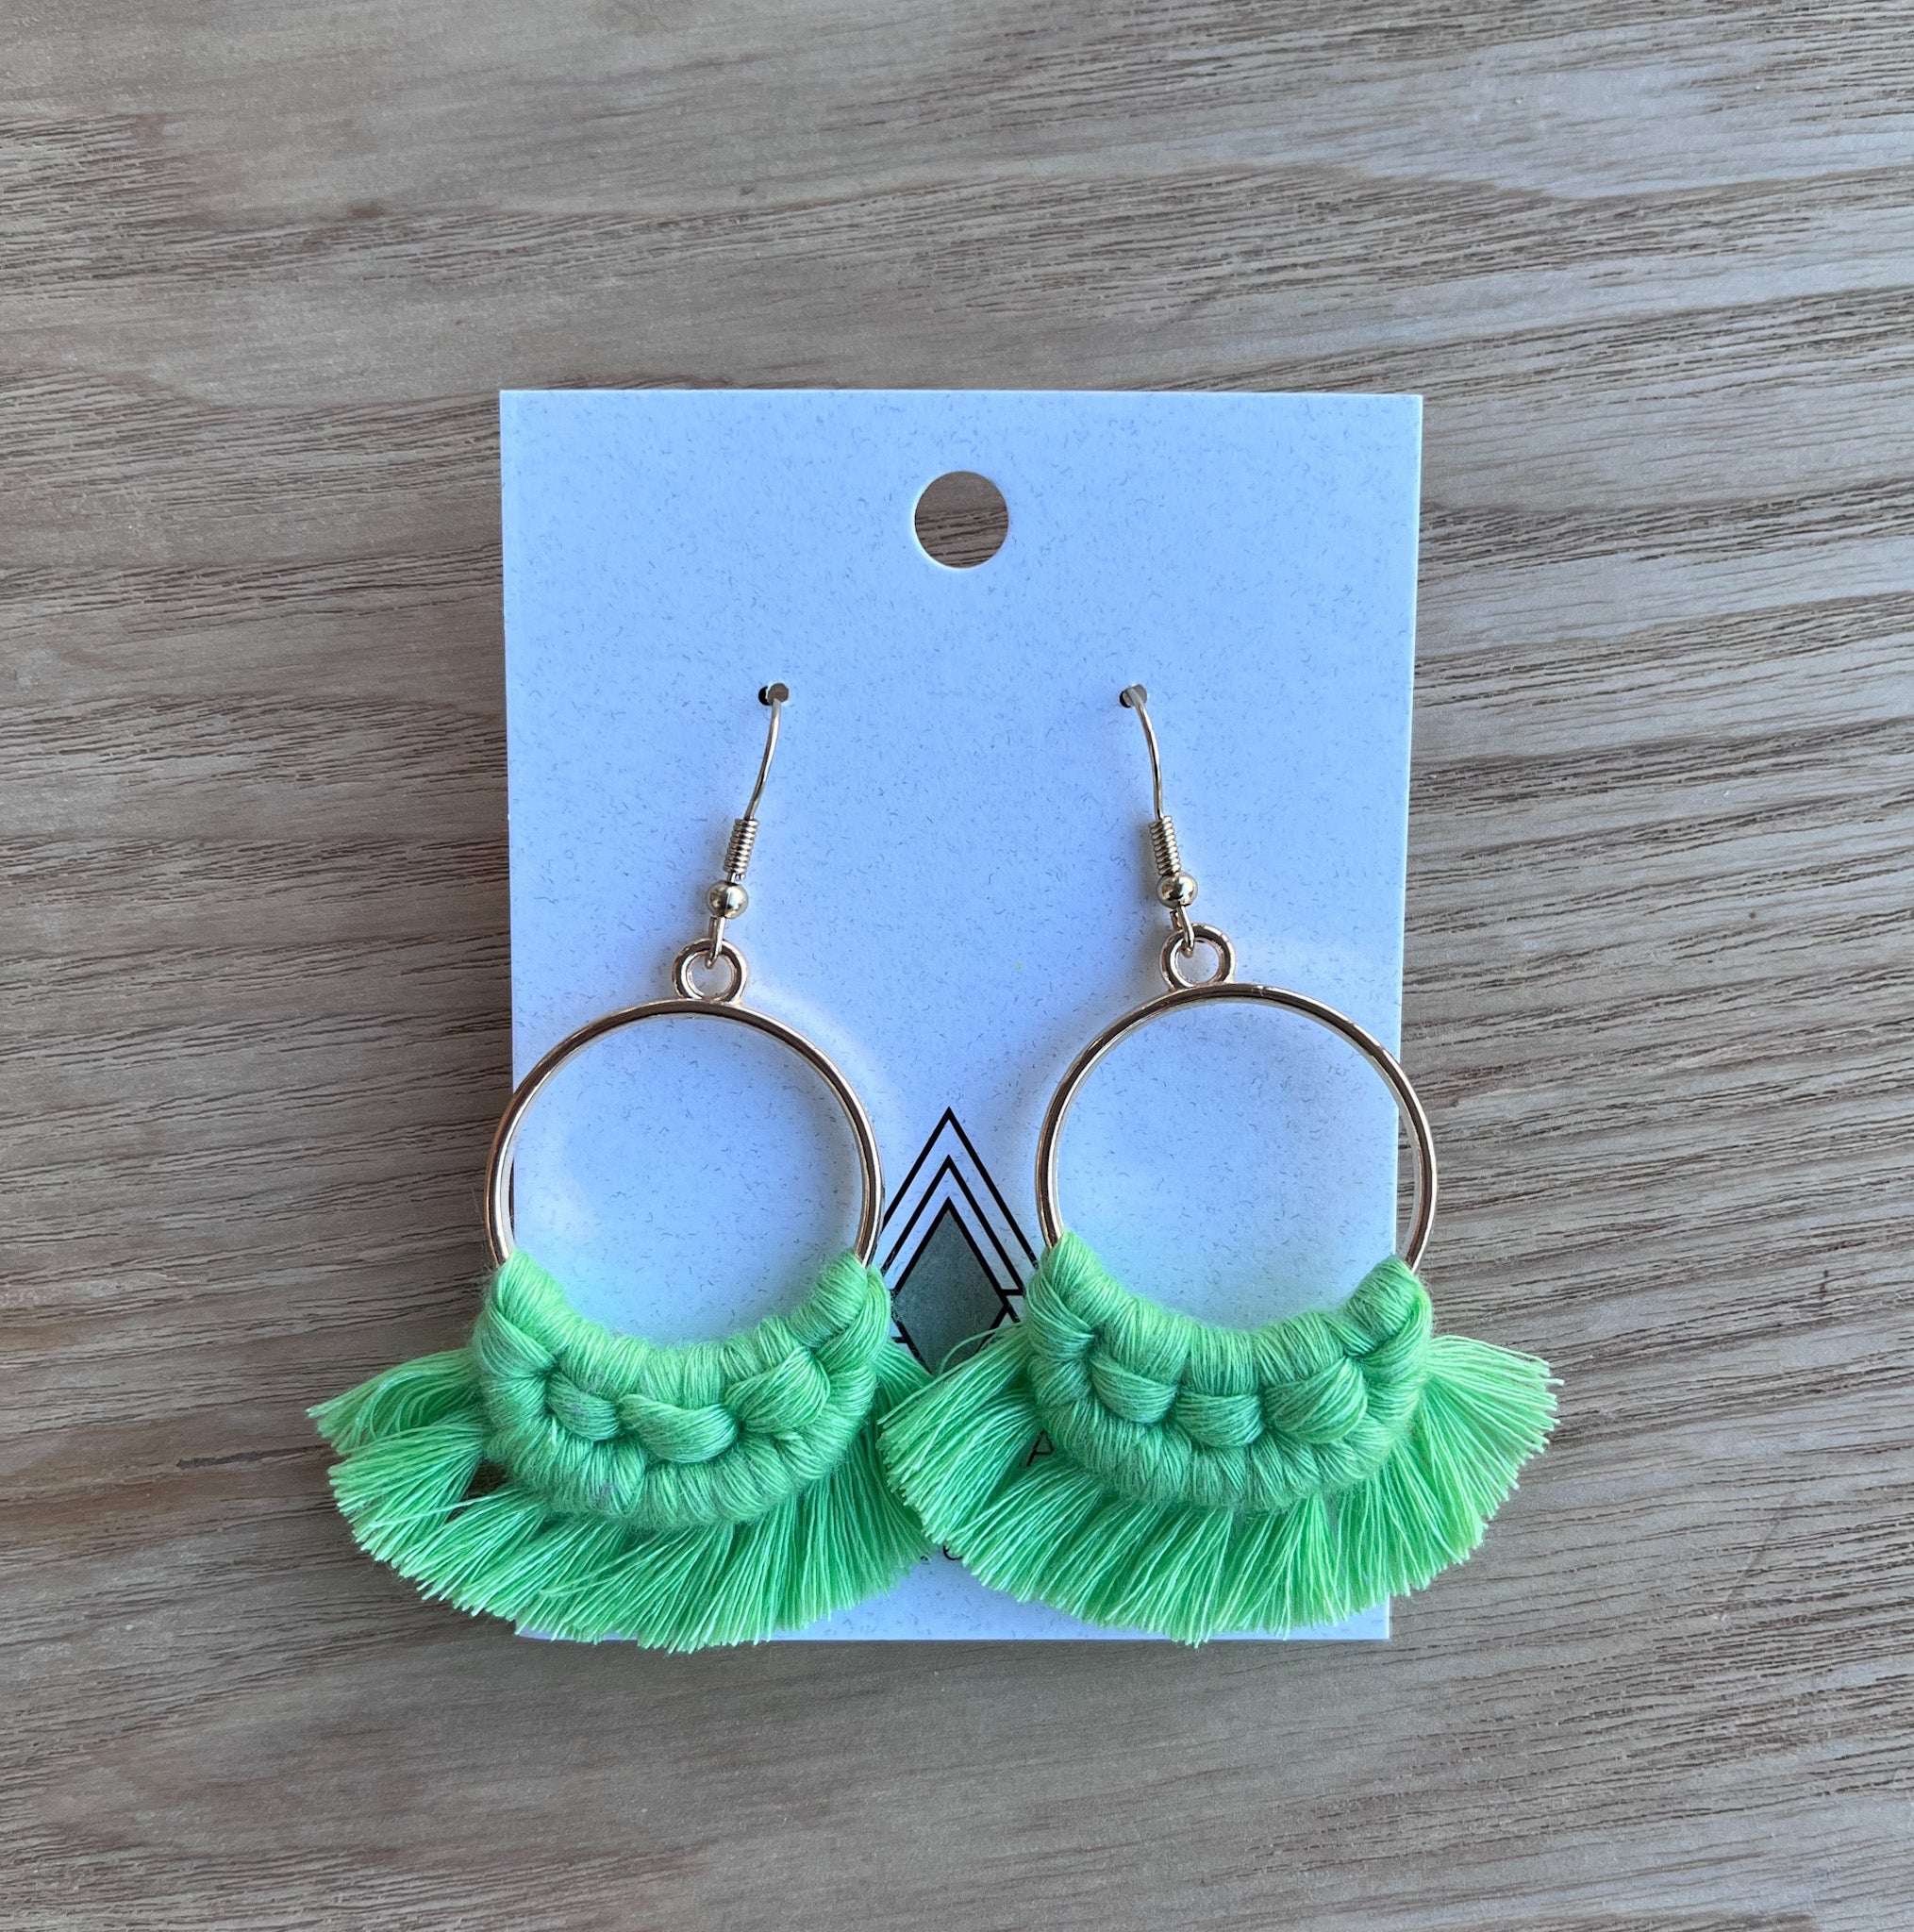 Lightweight Spring Green Cotton Rounds - Lead and Nickel Free - Earrings - Bijou Her -  -  - 